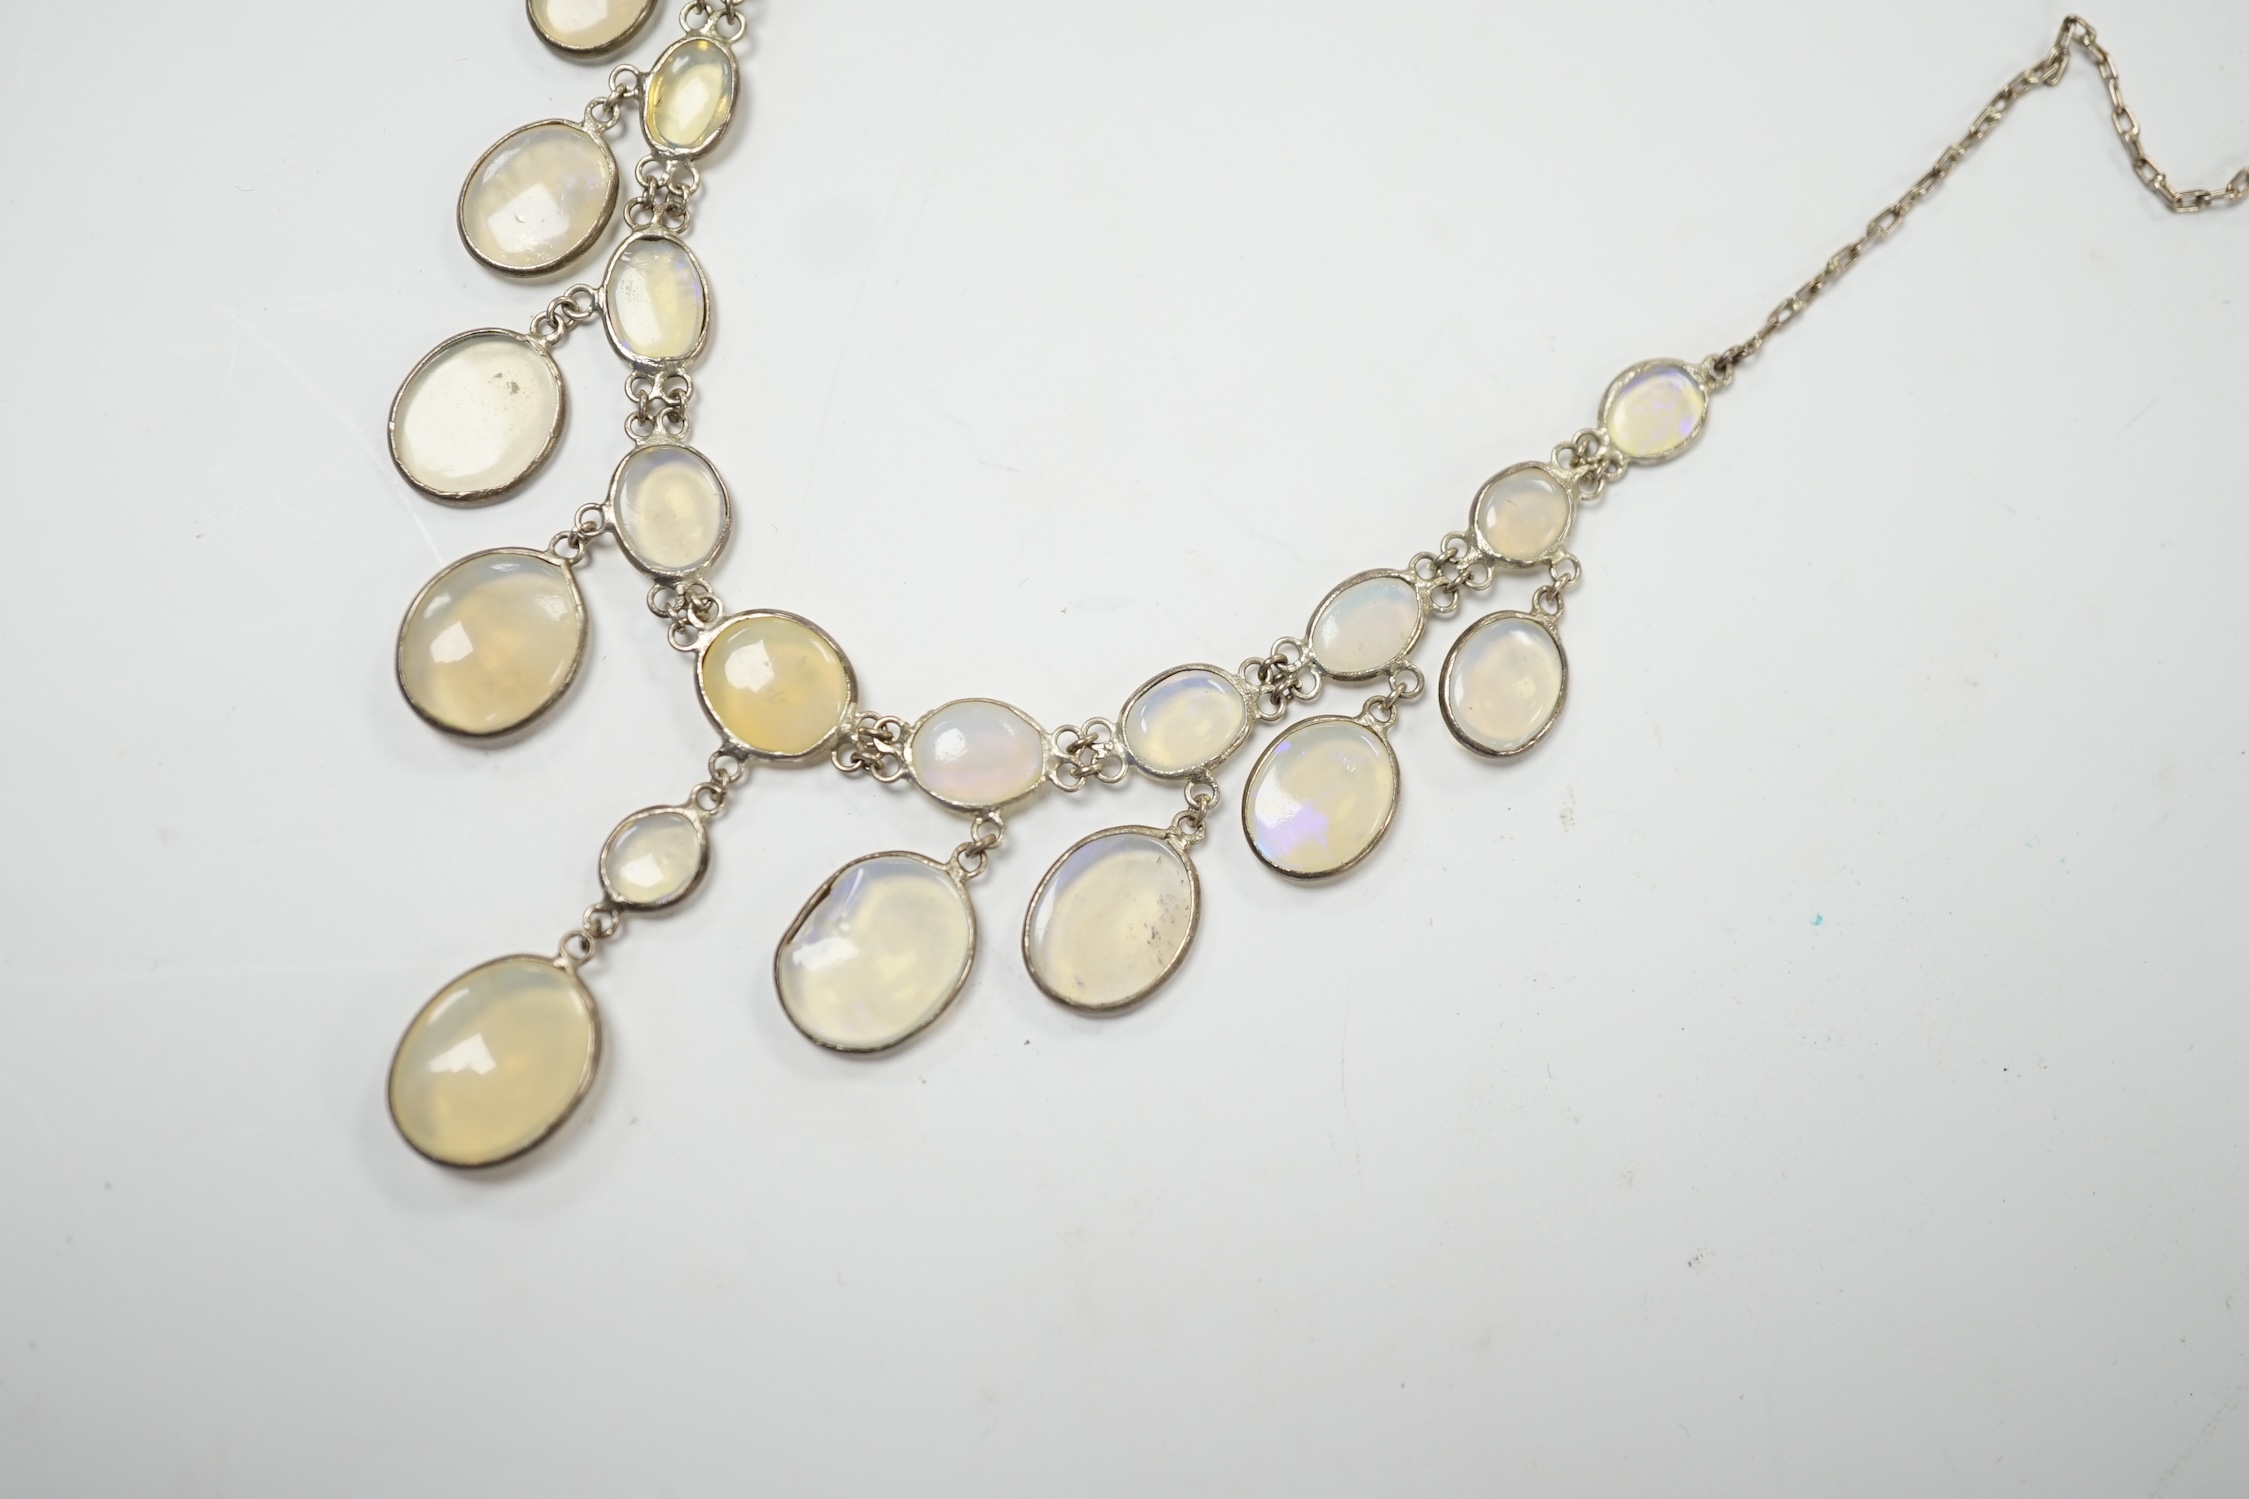 A white metal and graduated cabochon moonstone set drop necklace, 46cm. Condition - fair, one stone chipped